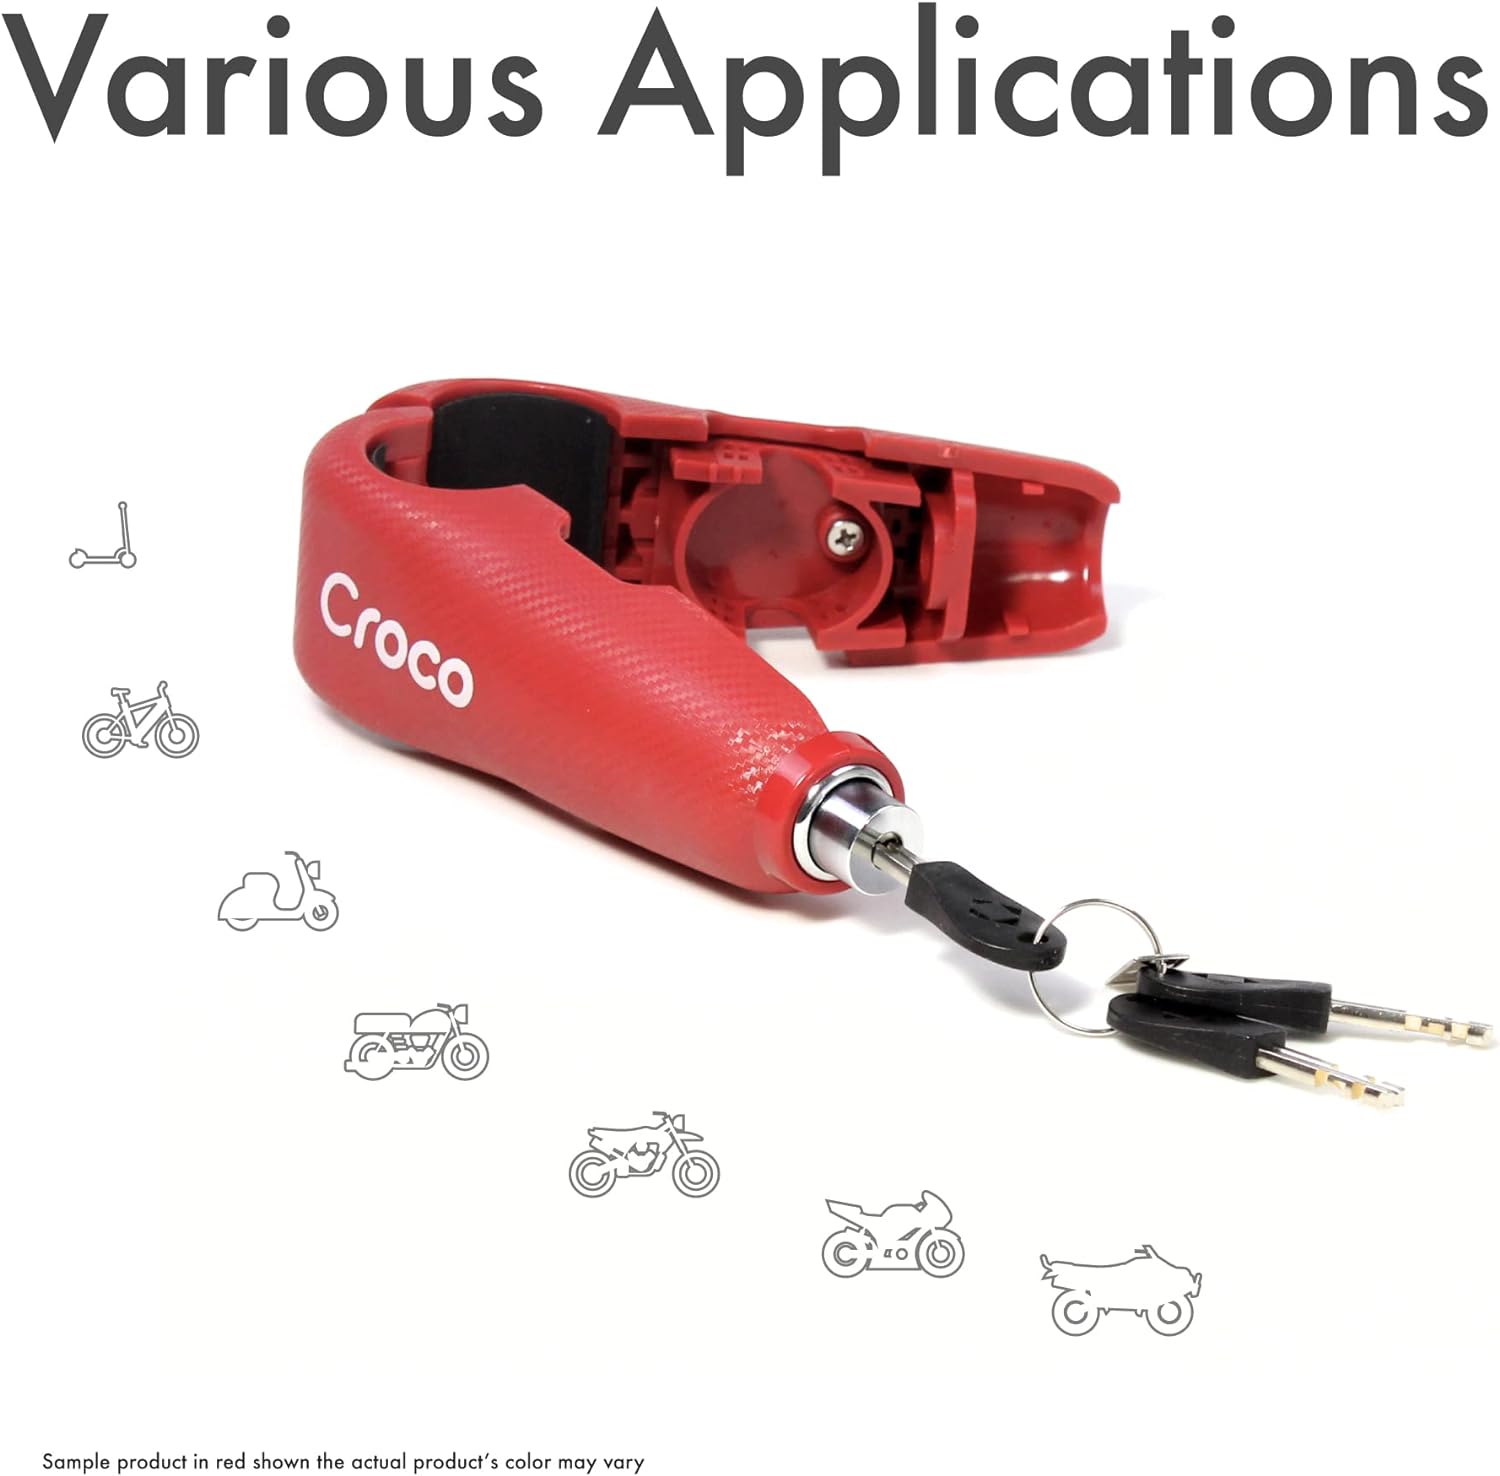 The image showcases a red Croco alarm lock and a set of keys, with a focus on its versatility. The text "Various Applications" and corresponding icons suggest the lock can be used for different vehicles and equipment such as bicycles, scooters, motorcycles, and trailers. There's a disclaimer noting that the sample product is red but actual product color may vary, indicating the lock could come in different colors. The presentation is straightforward, with a white background to emphasize the product